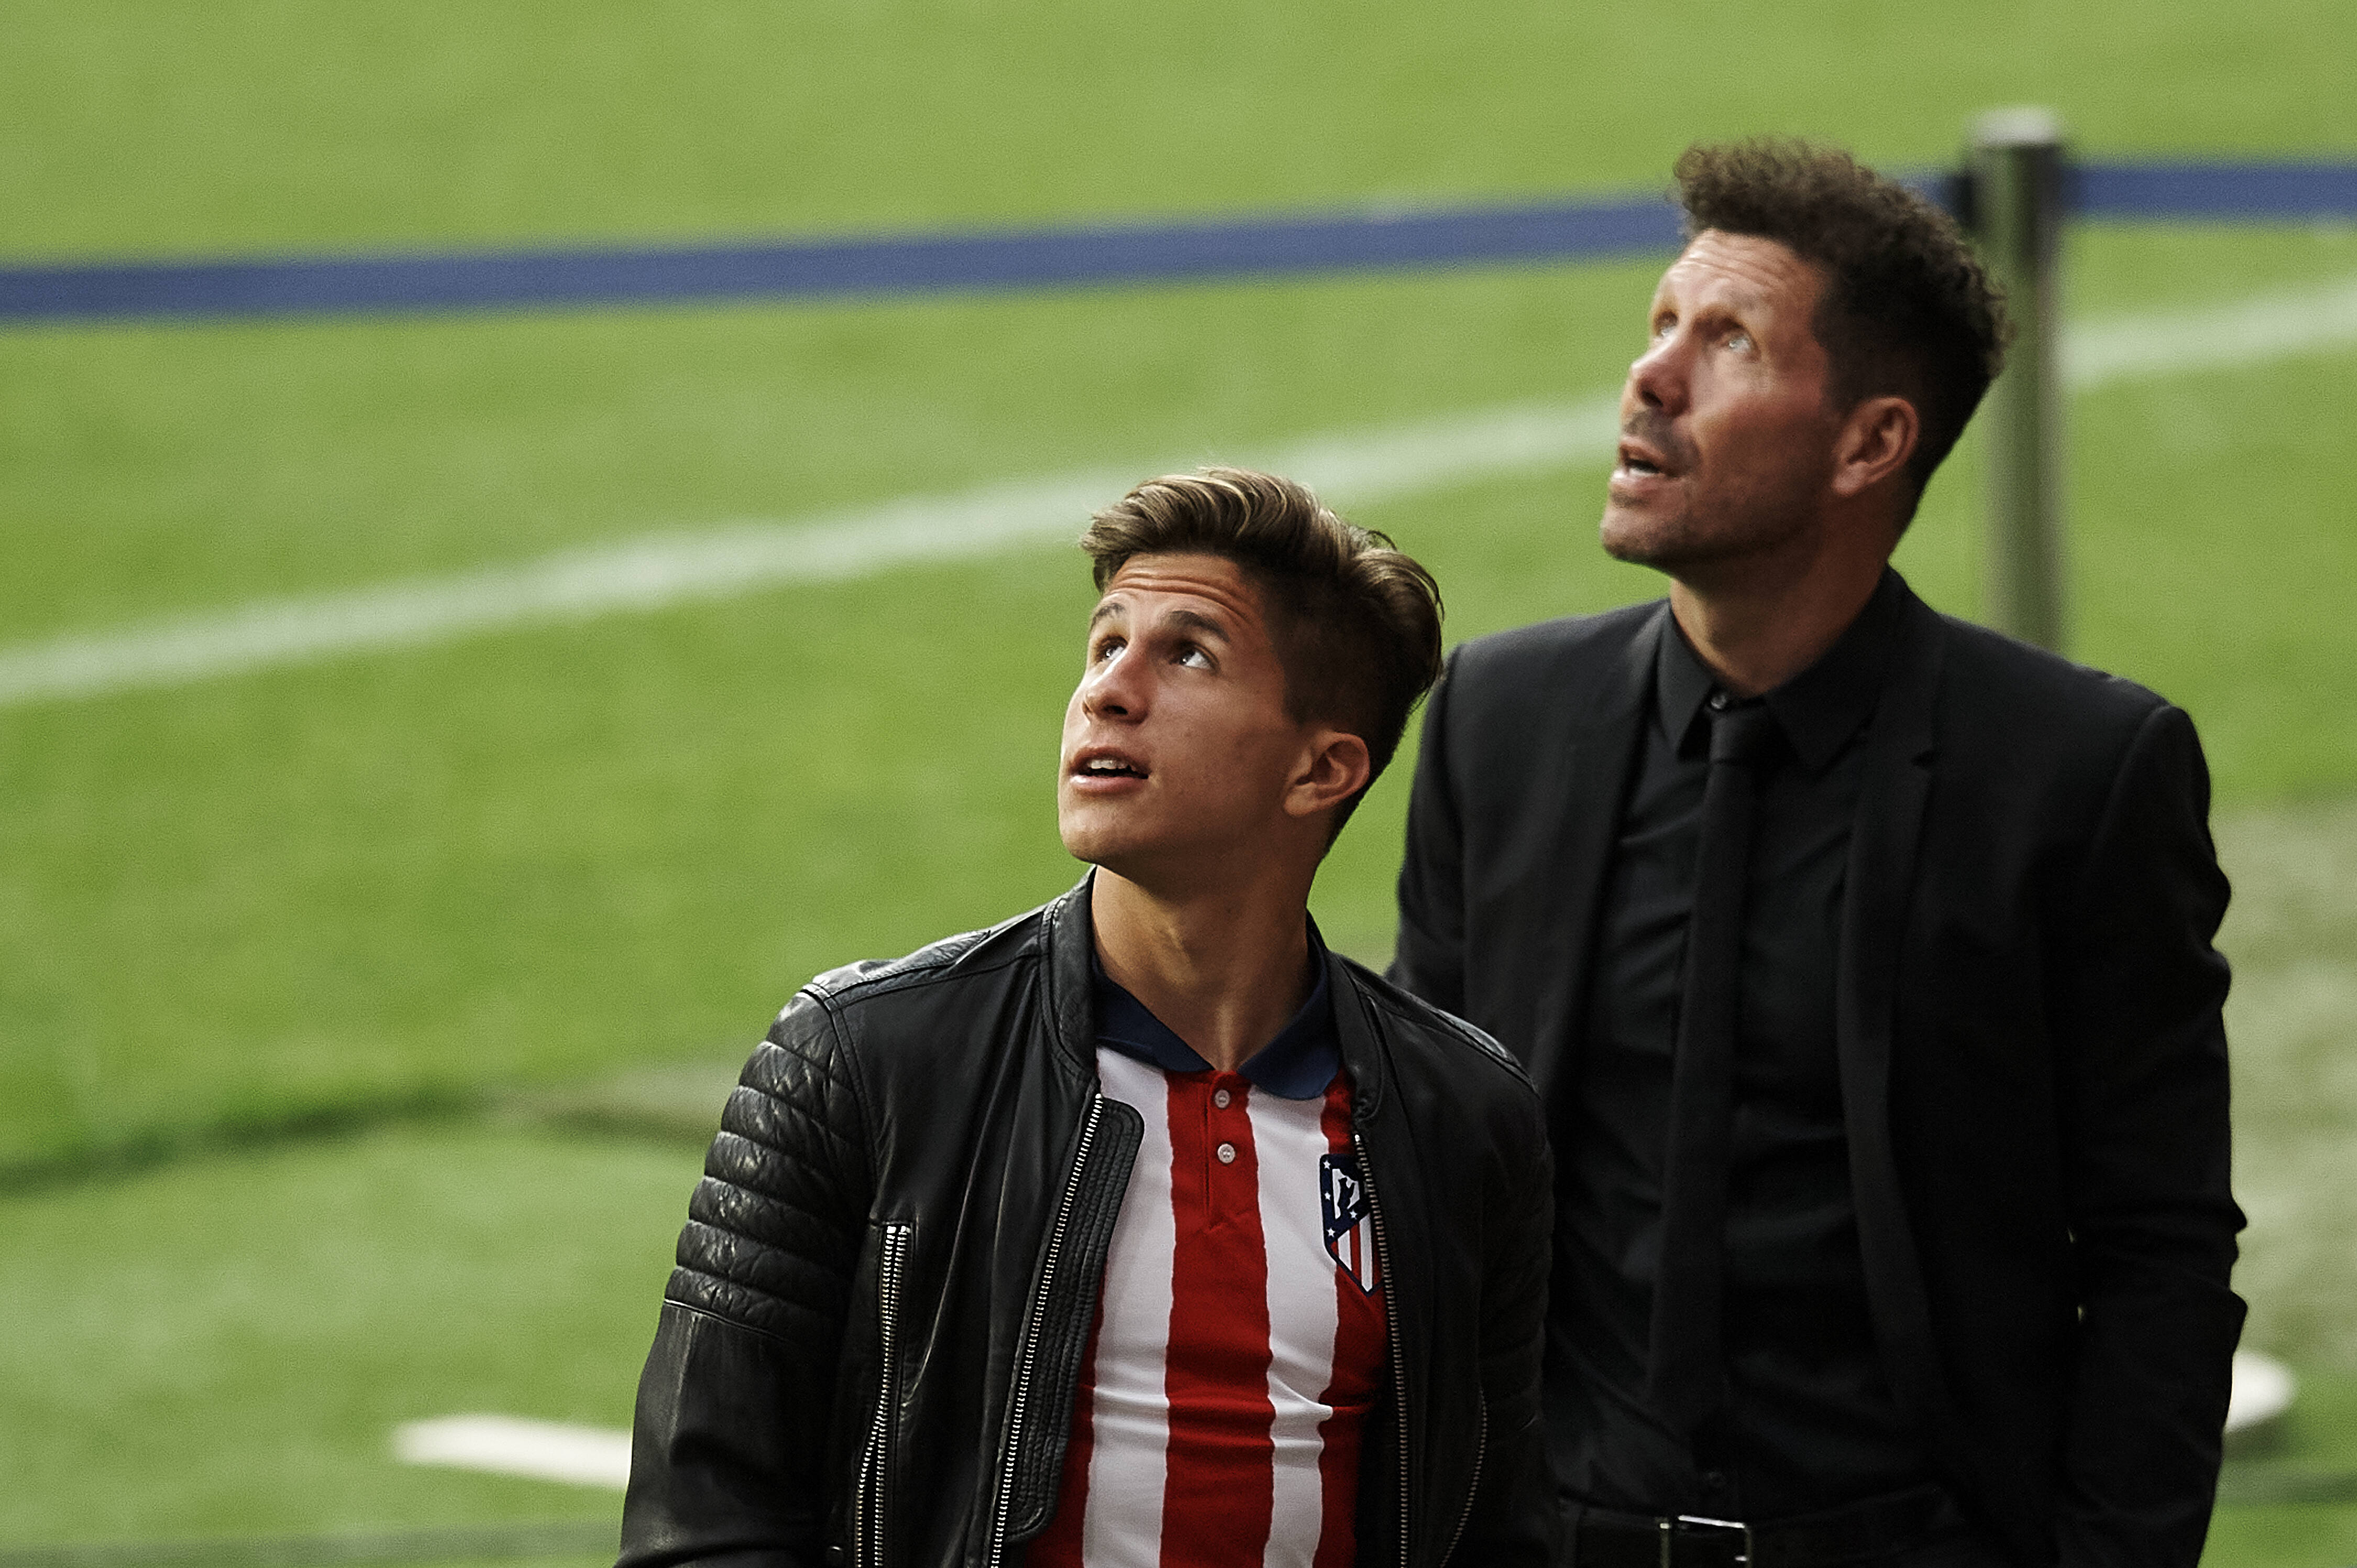 Atletico Madrid suffer pre-season defeat as Diego Simeone’s son sees goal disallowed